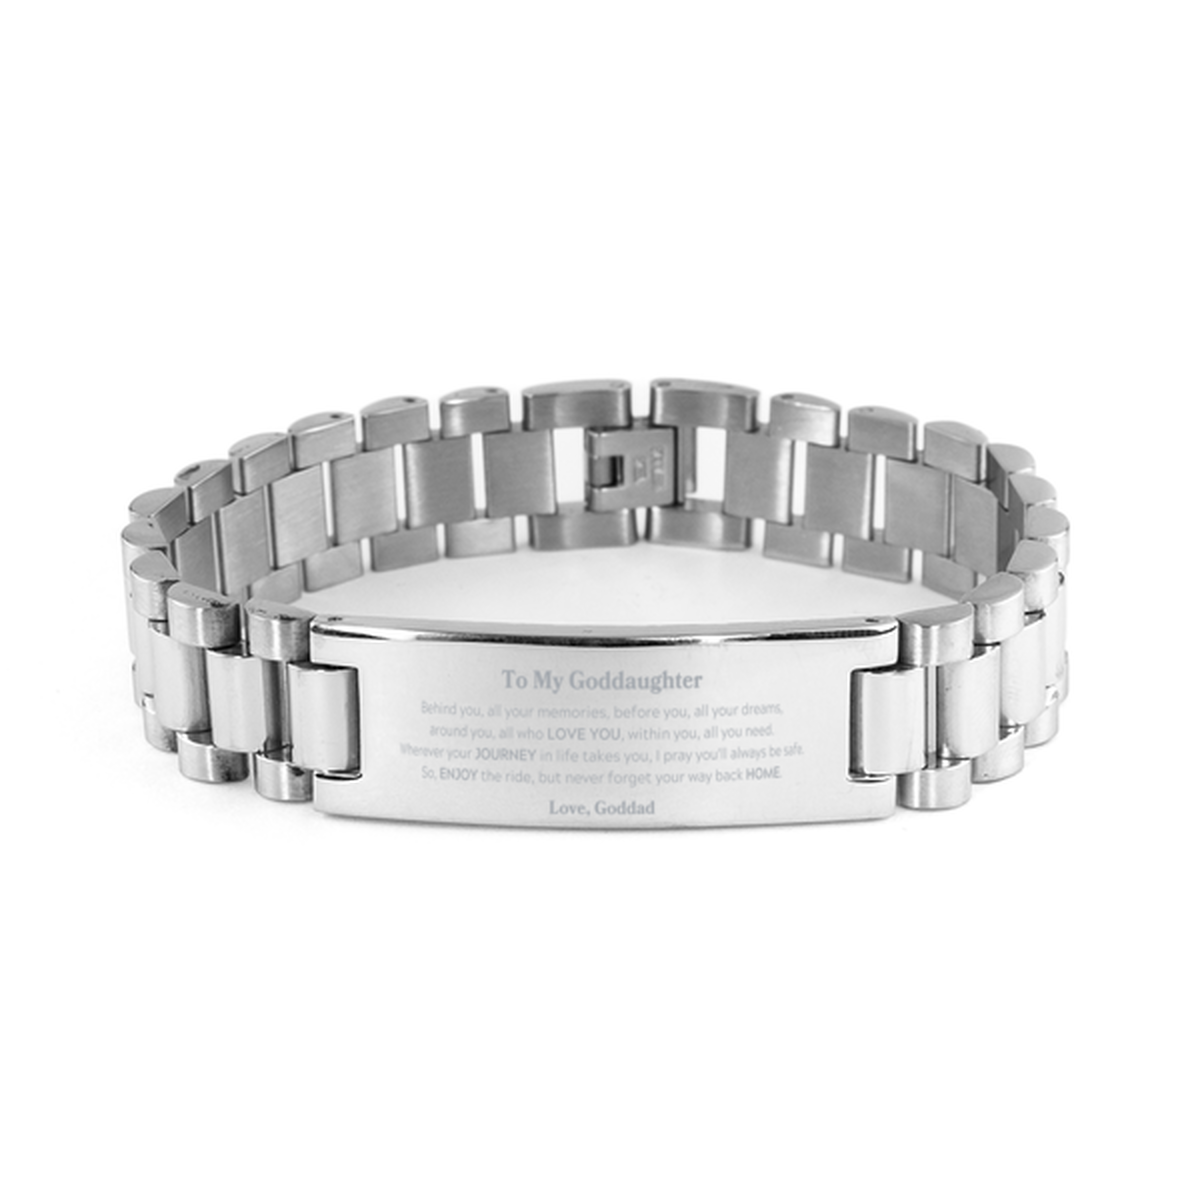 To My Goddaughter Graduation Gifts from Goddad, Goddaughter Ladder Stainless Steel Bracelet Christmas Birthday Gifts for Goddaughter Behind you, all your memories, before you, all your dreams. Love, Goddad